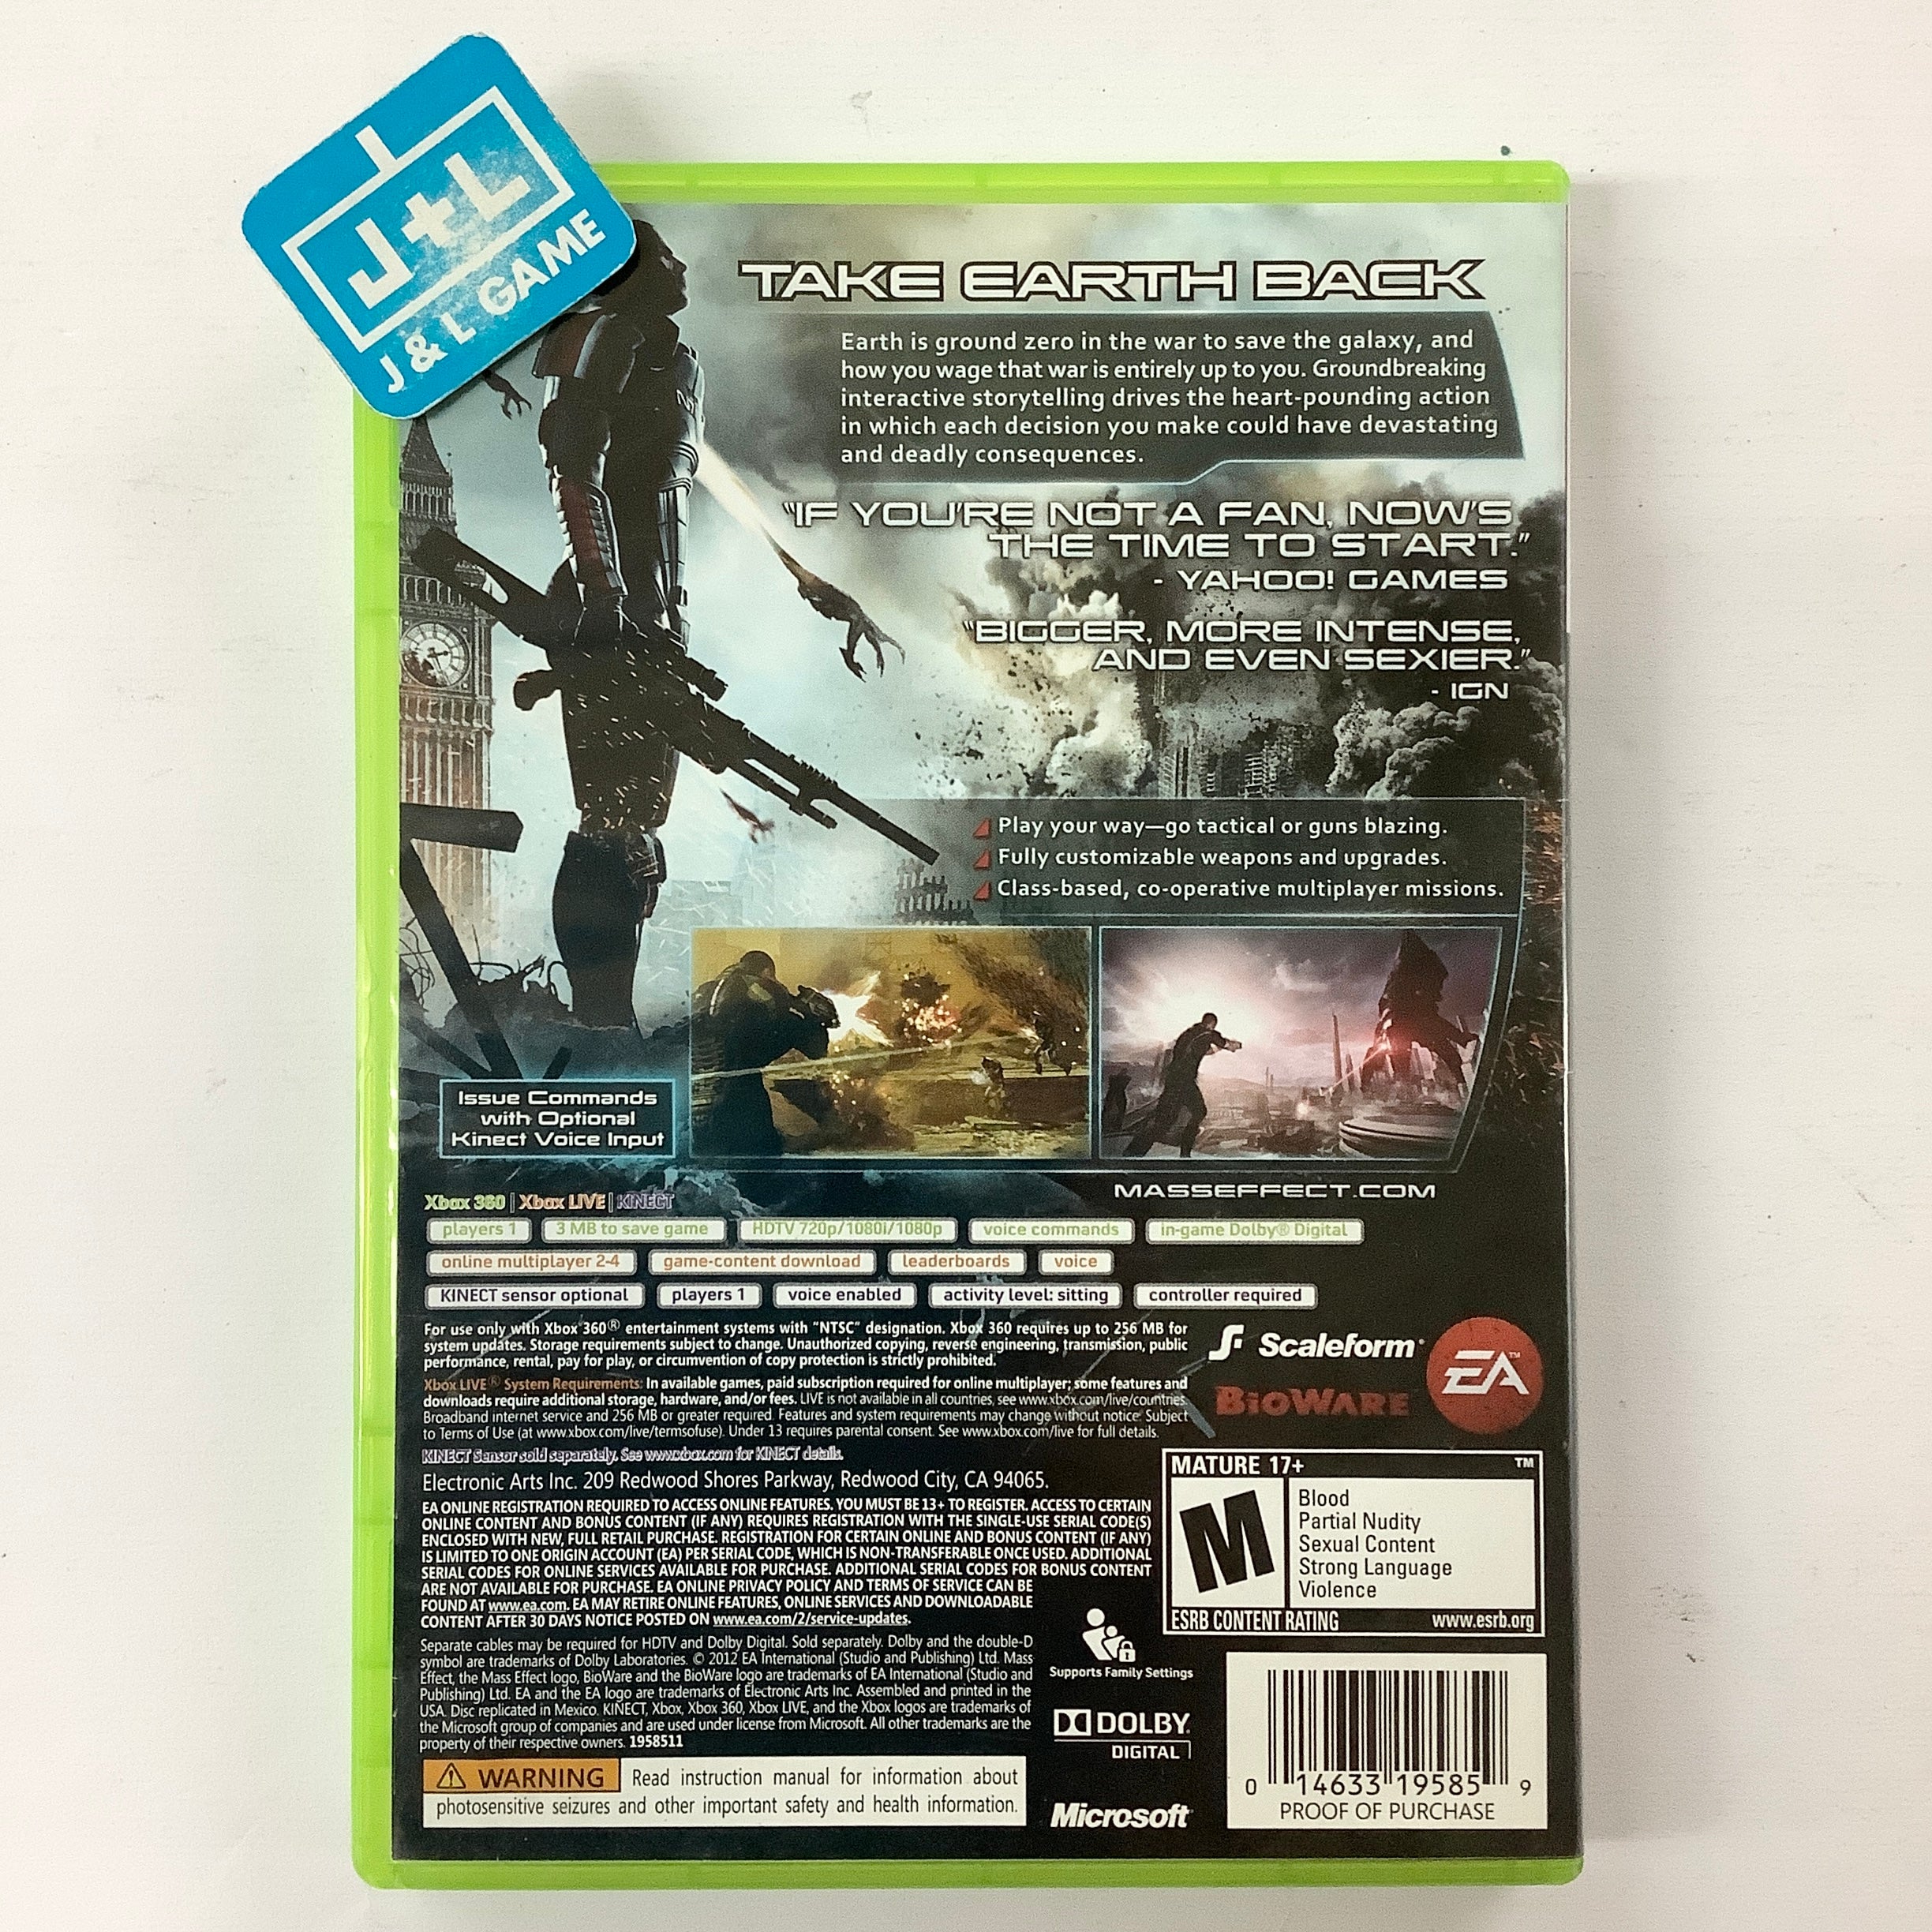 Mass Effect 3 - Xbox 360 [Pre-Owned] Video Games Electronic Arts   